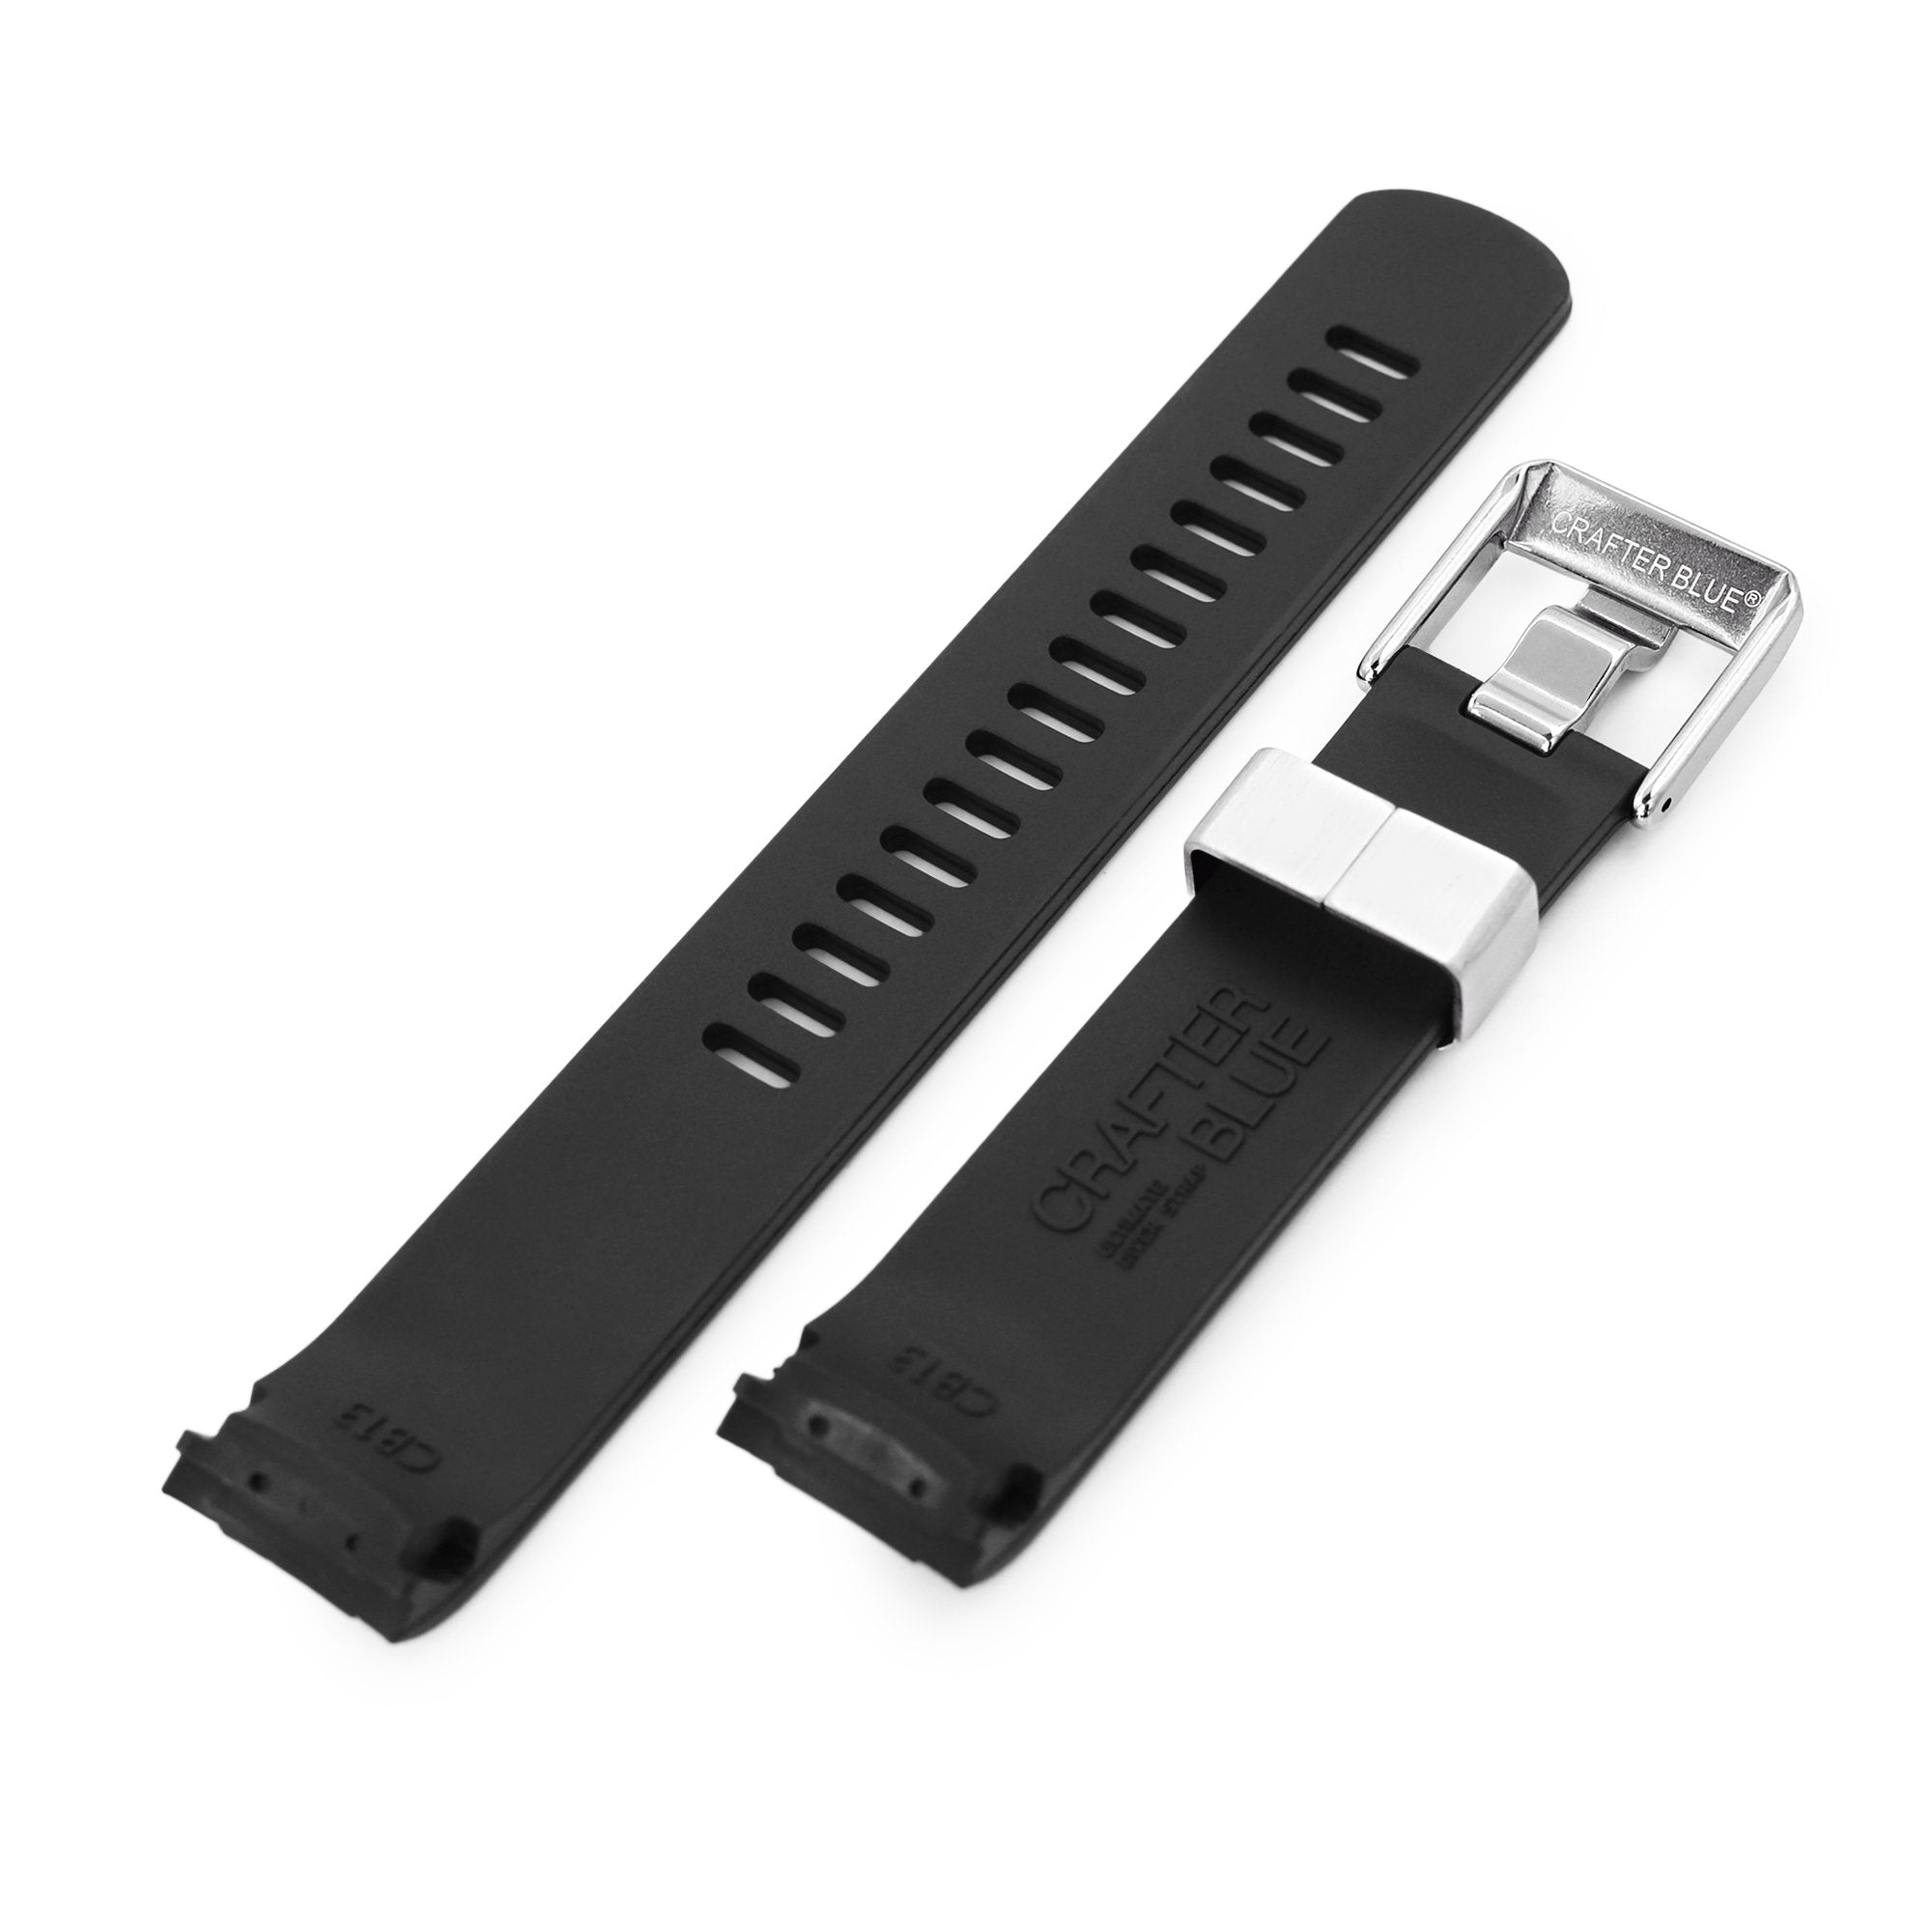 20mm Crafter Blue - Black Rubber Curved Lug Watch Strap for Seiko Baby MM200 & Mini Turtles Strapcode Watch Bands